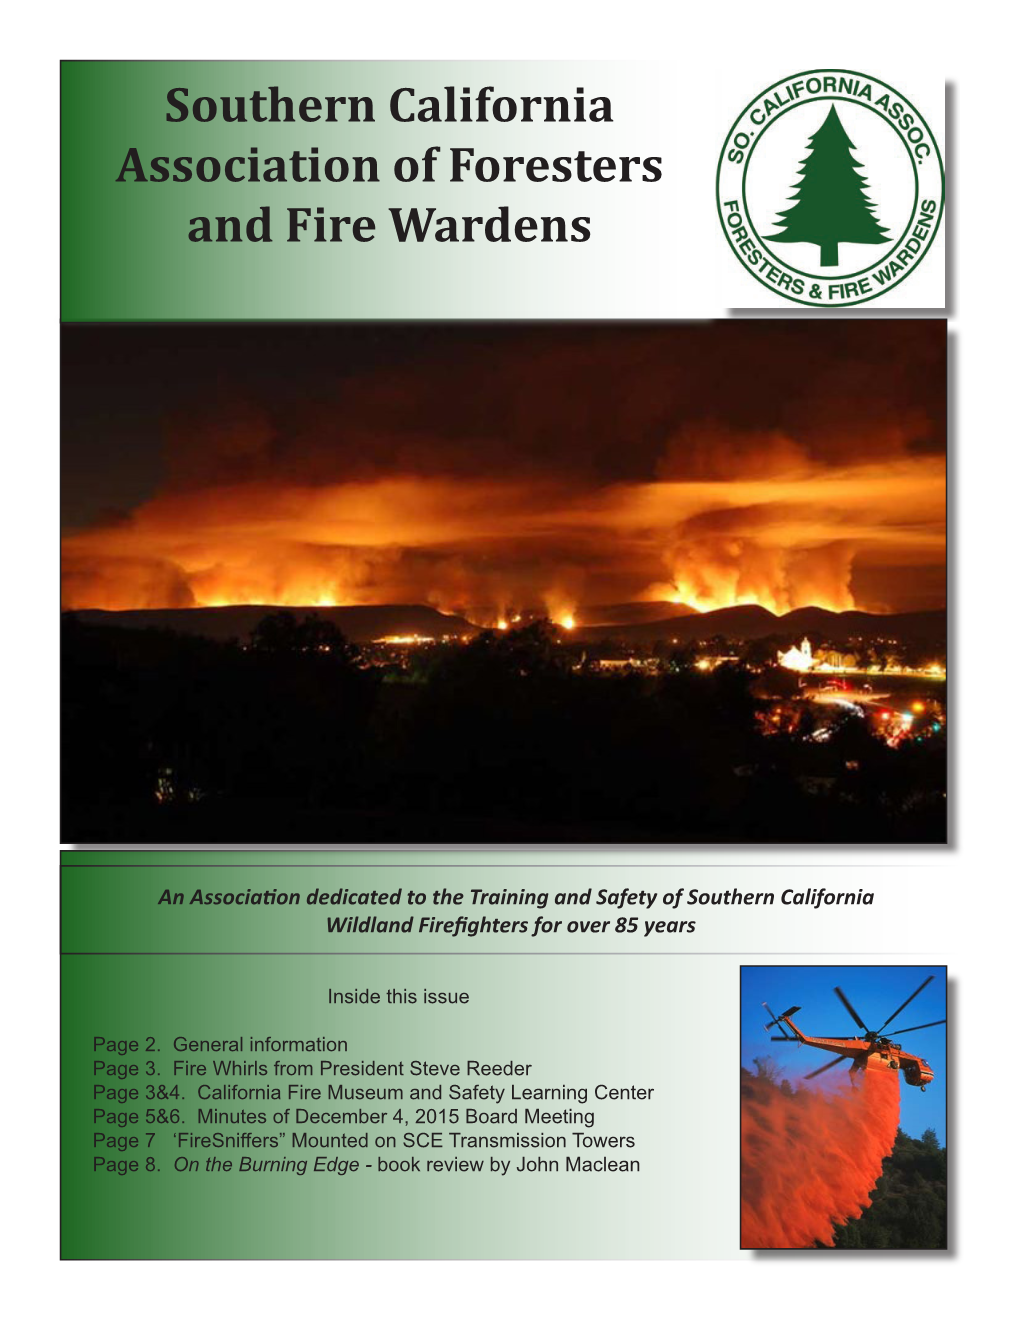 Southern California Association of Foresters and Fire Wardens